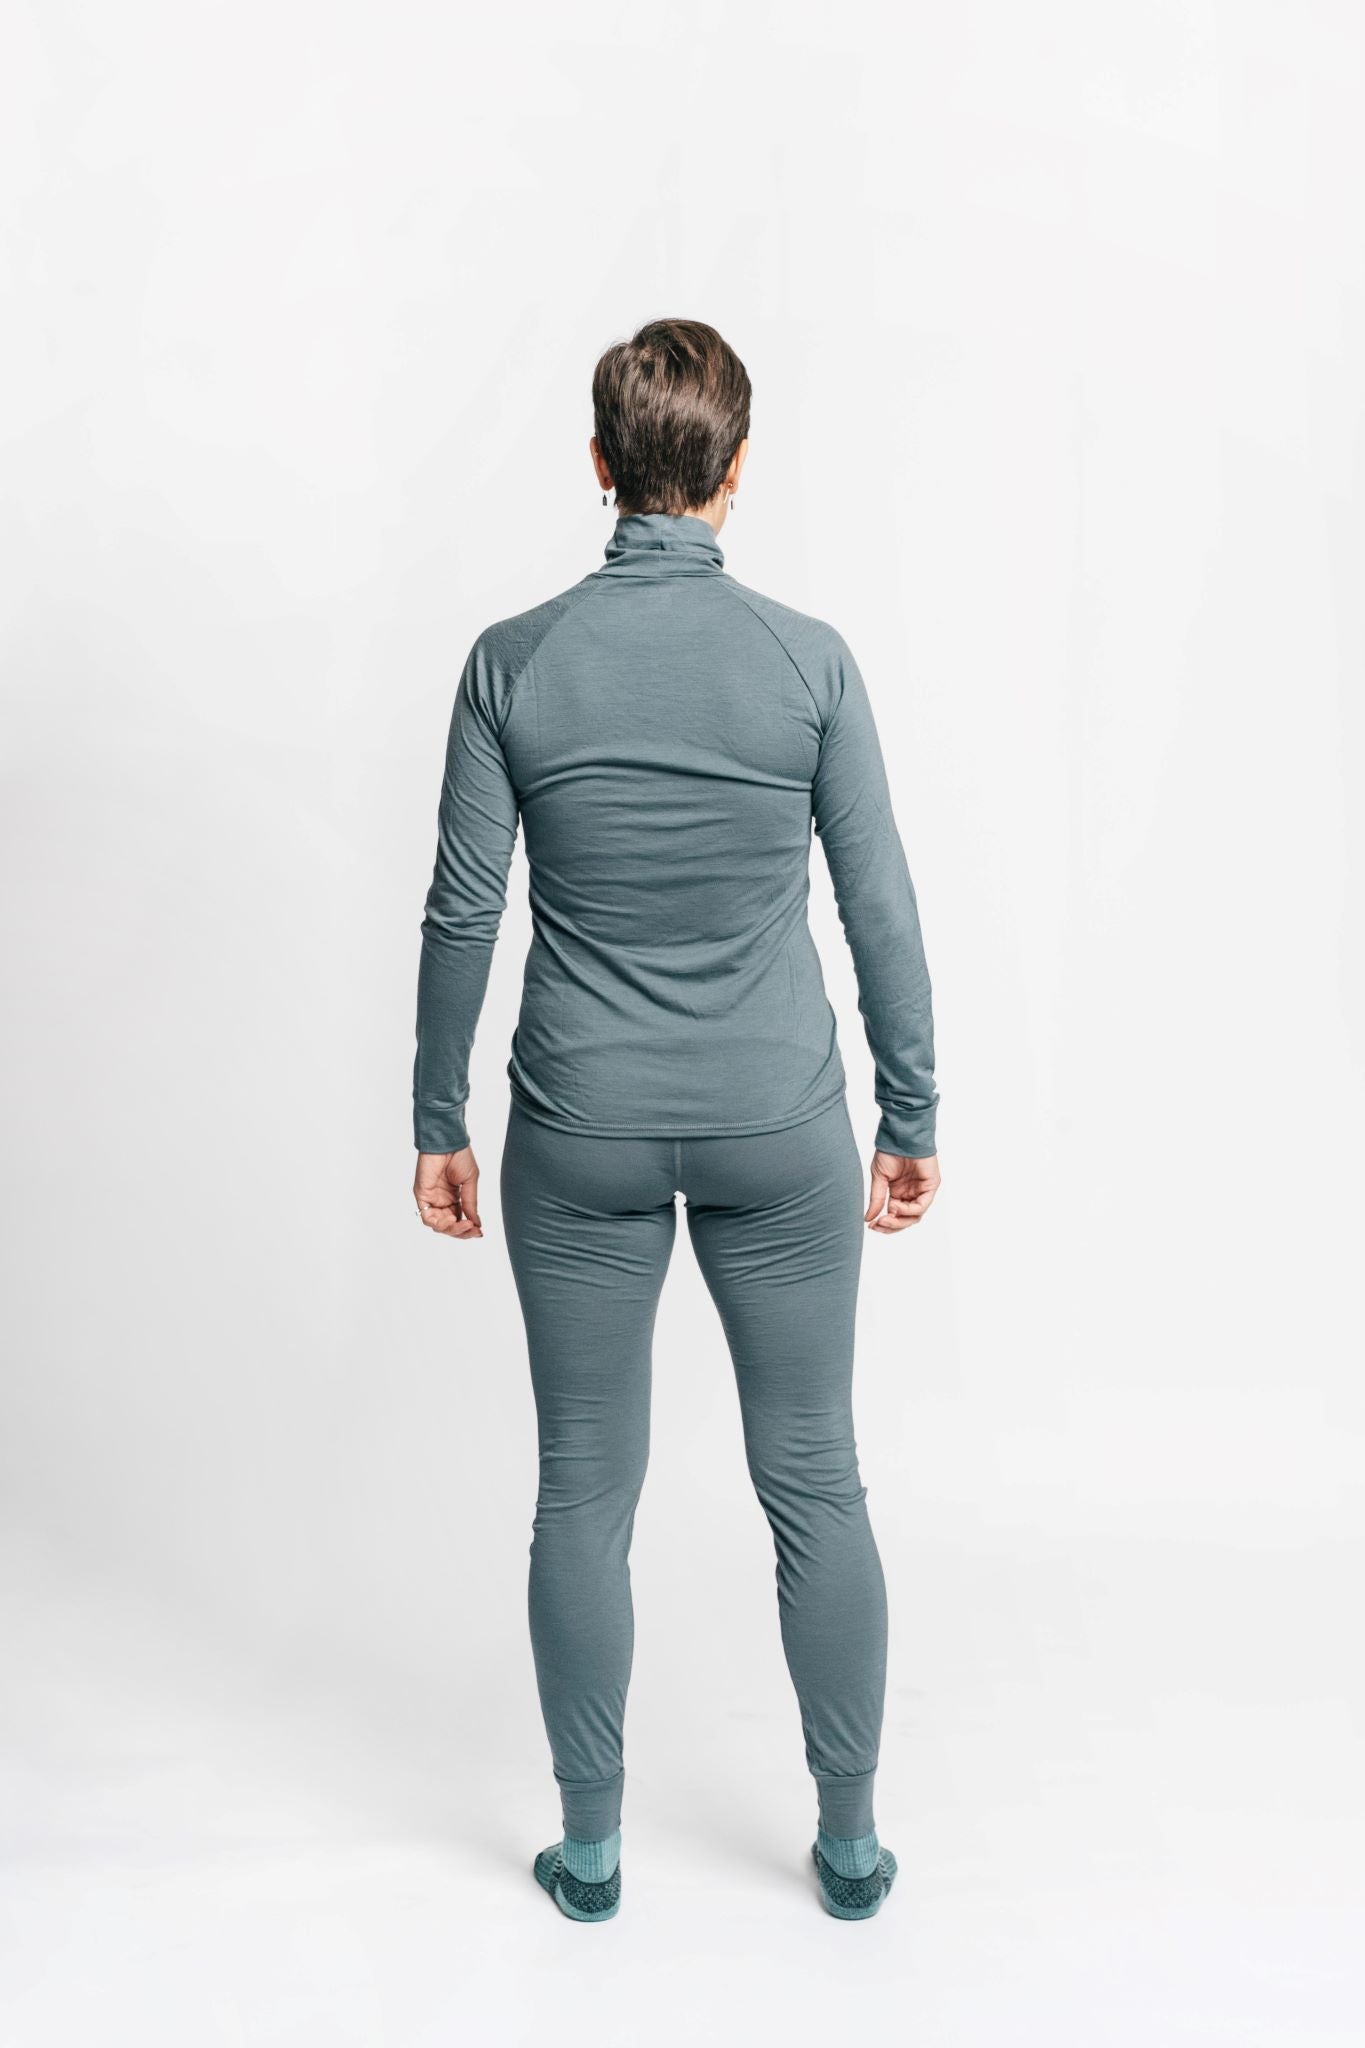 alpine fit merino wool base layer top and bottom on model viewed from the back